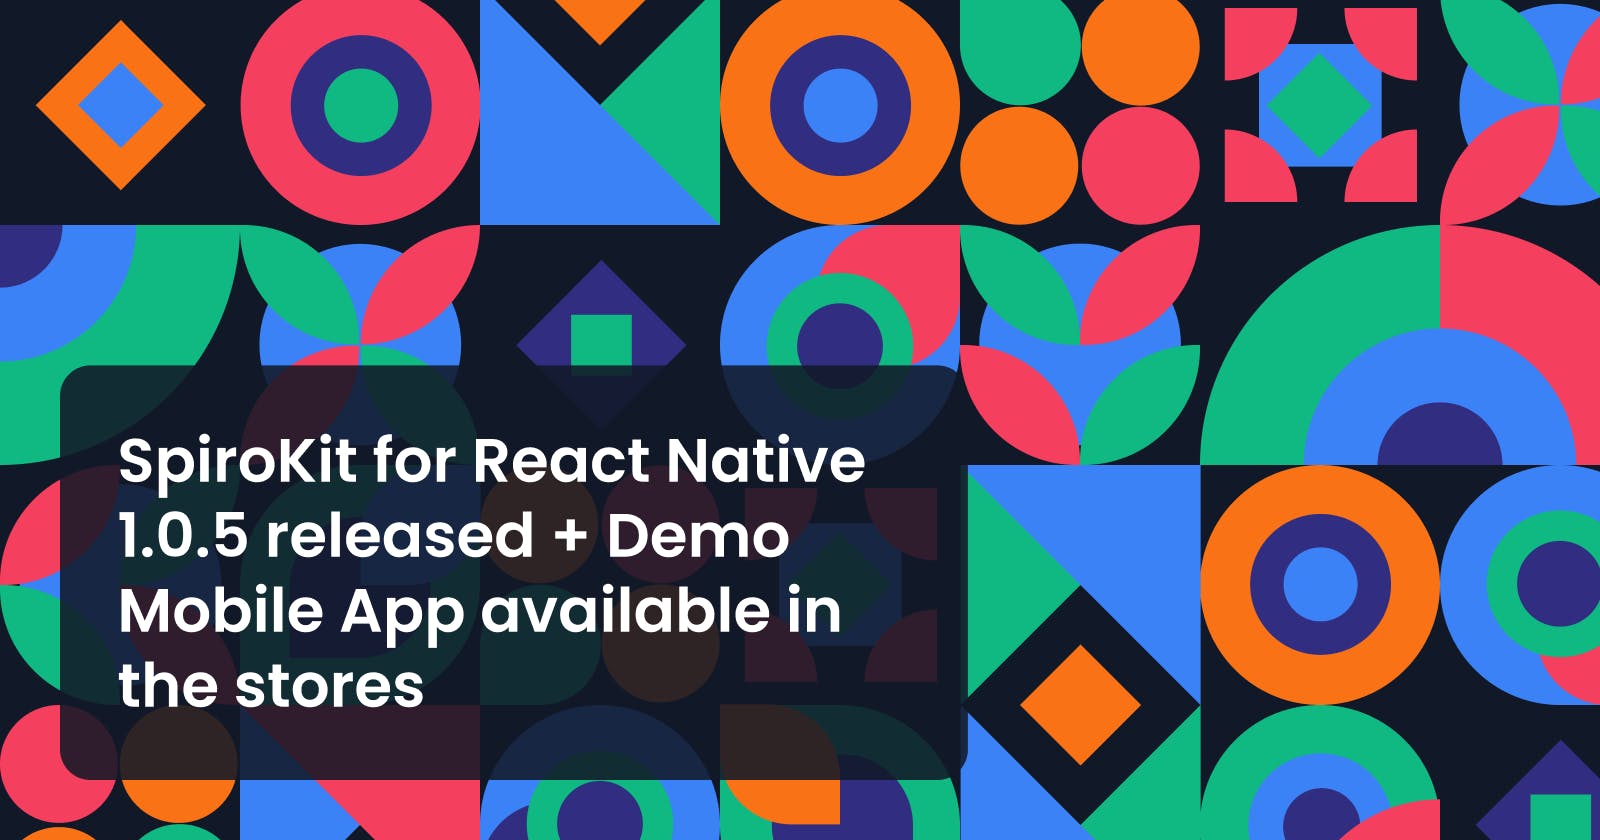 SpiroKit for React Native 1.0.5 released + Demo Mobile App available in the stores